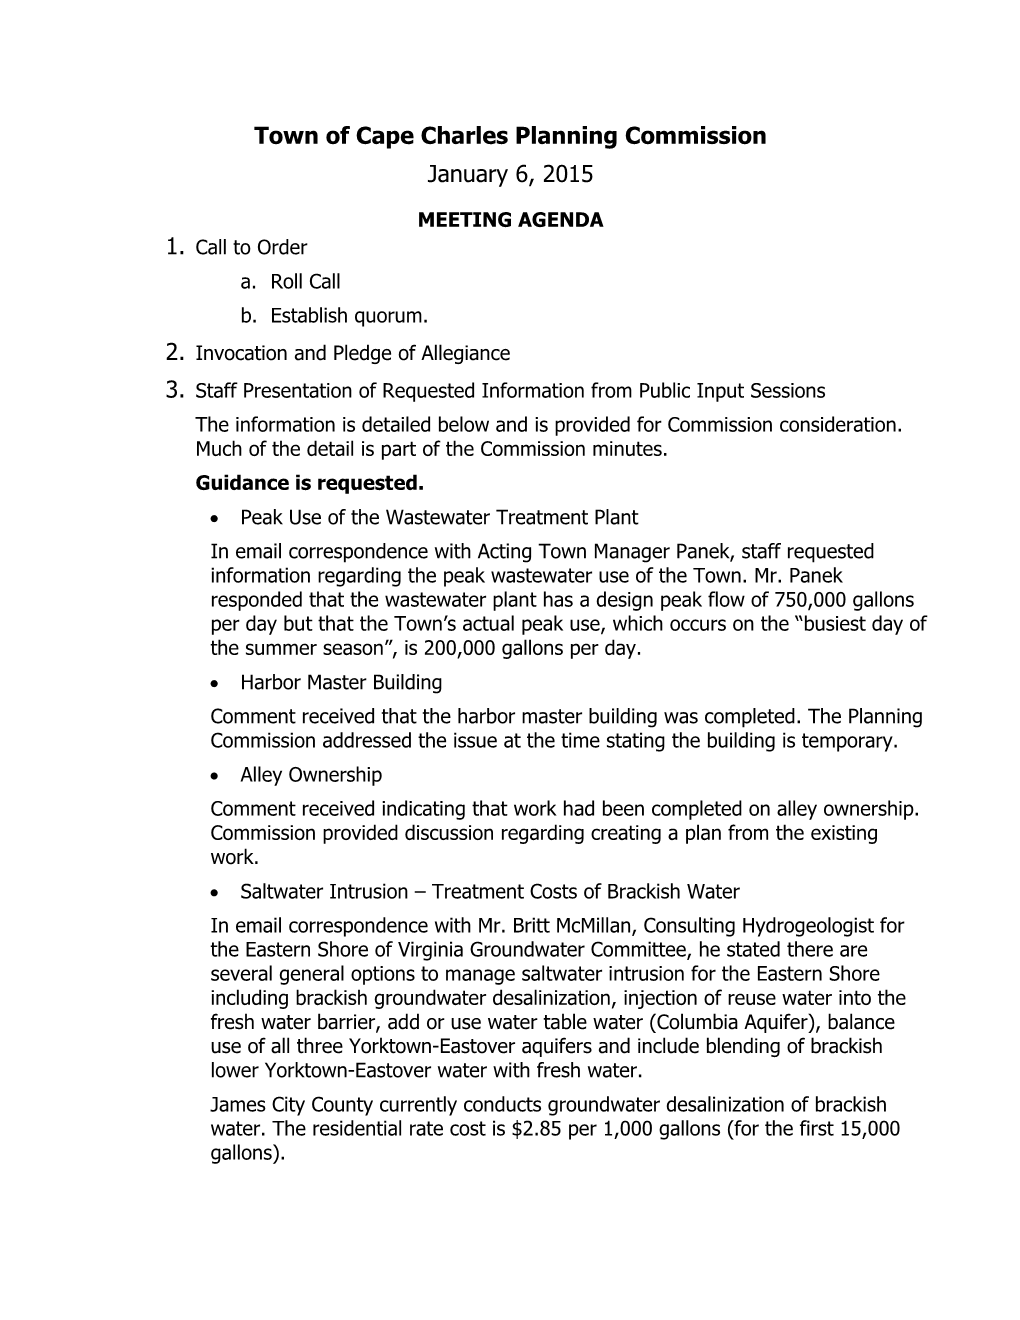 Town of Cape Charles Planning Commission January 6, 2015